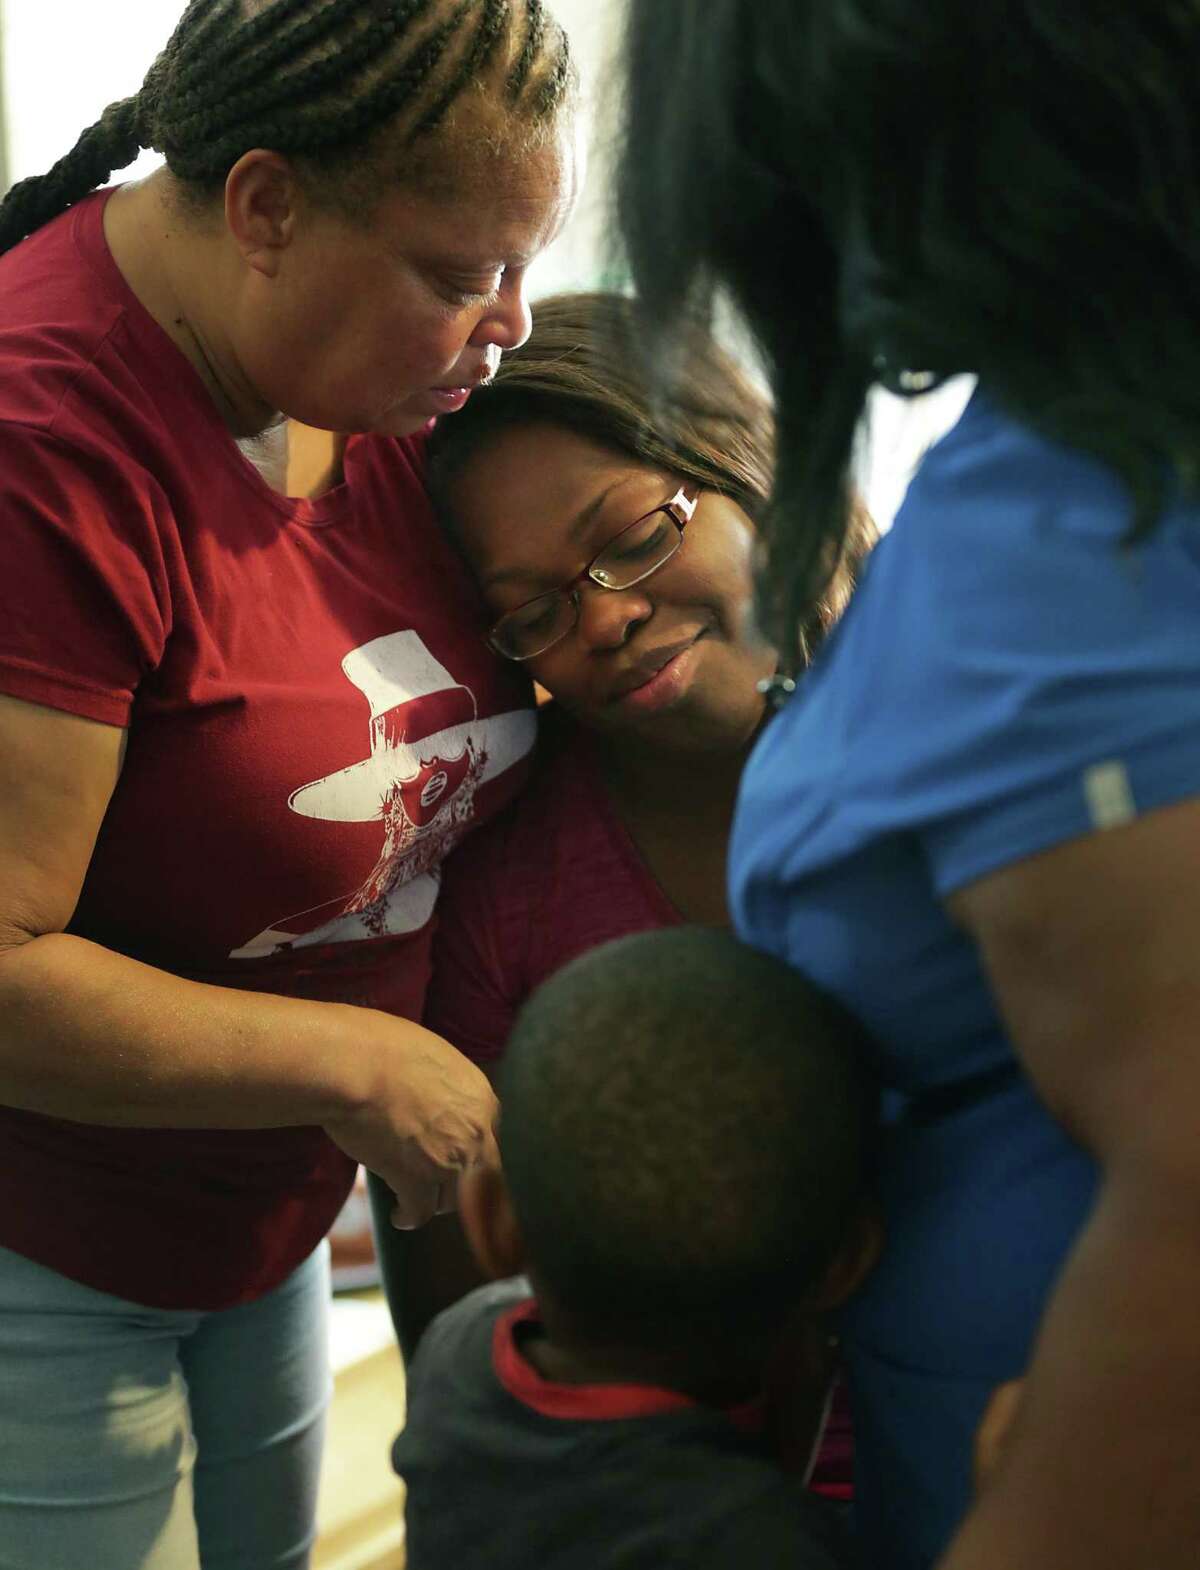 Cyntwanisha Whitley, center, mother of 4 year-old De-Earlvion Whitley who was killed in a drive-by shooting, is comforted by her mother Temekia O'Cnnor, left, and Tamika Hawkins, right, as family members and friends gather to support each other July 20, 2017.